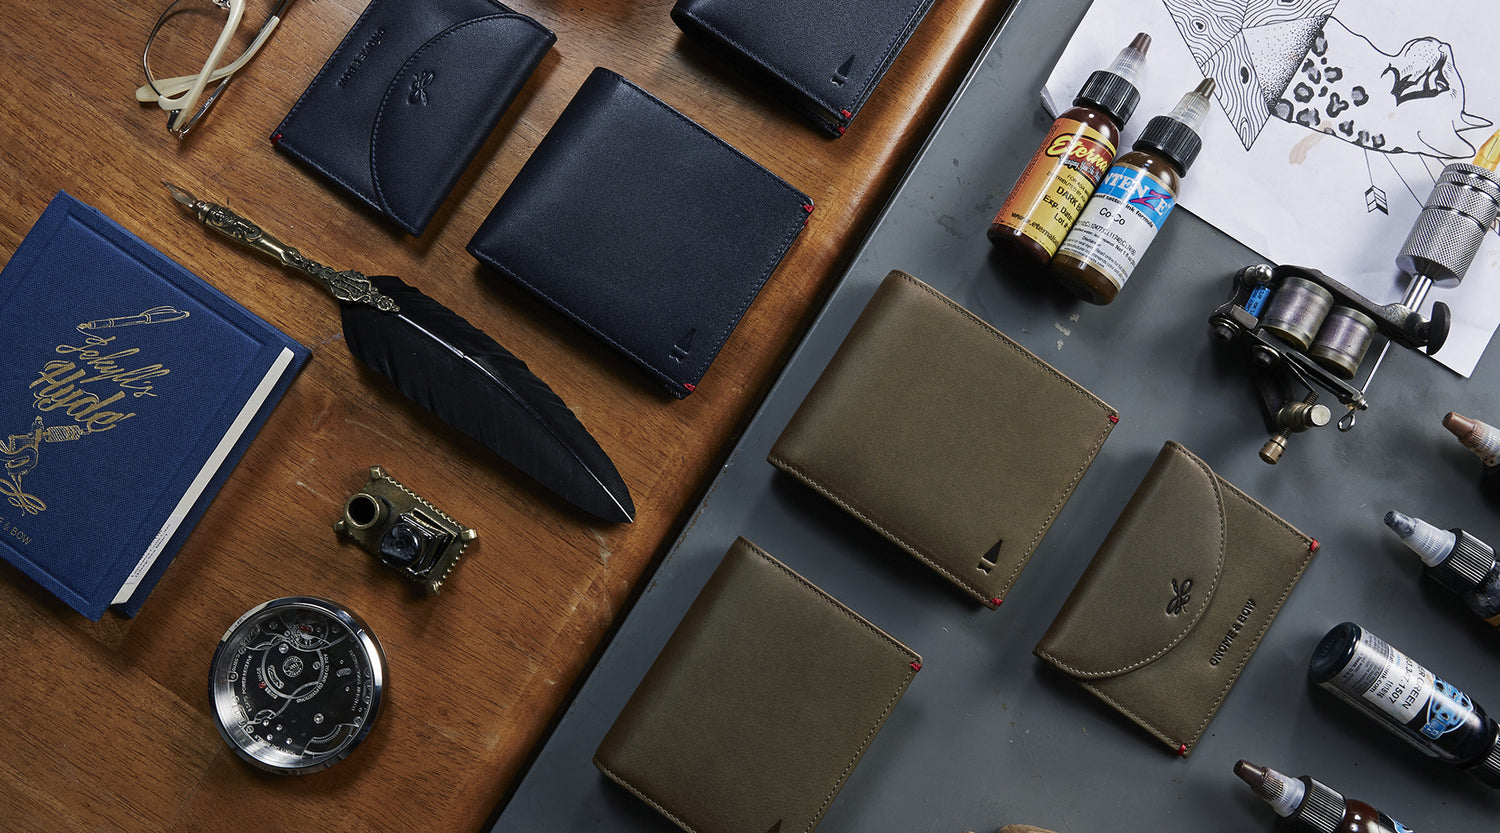 29th Jul | (AW16) Gnome & Bow's expansion of wallets offers a solution for every need while possessing storytelling details